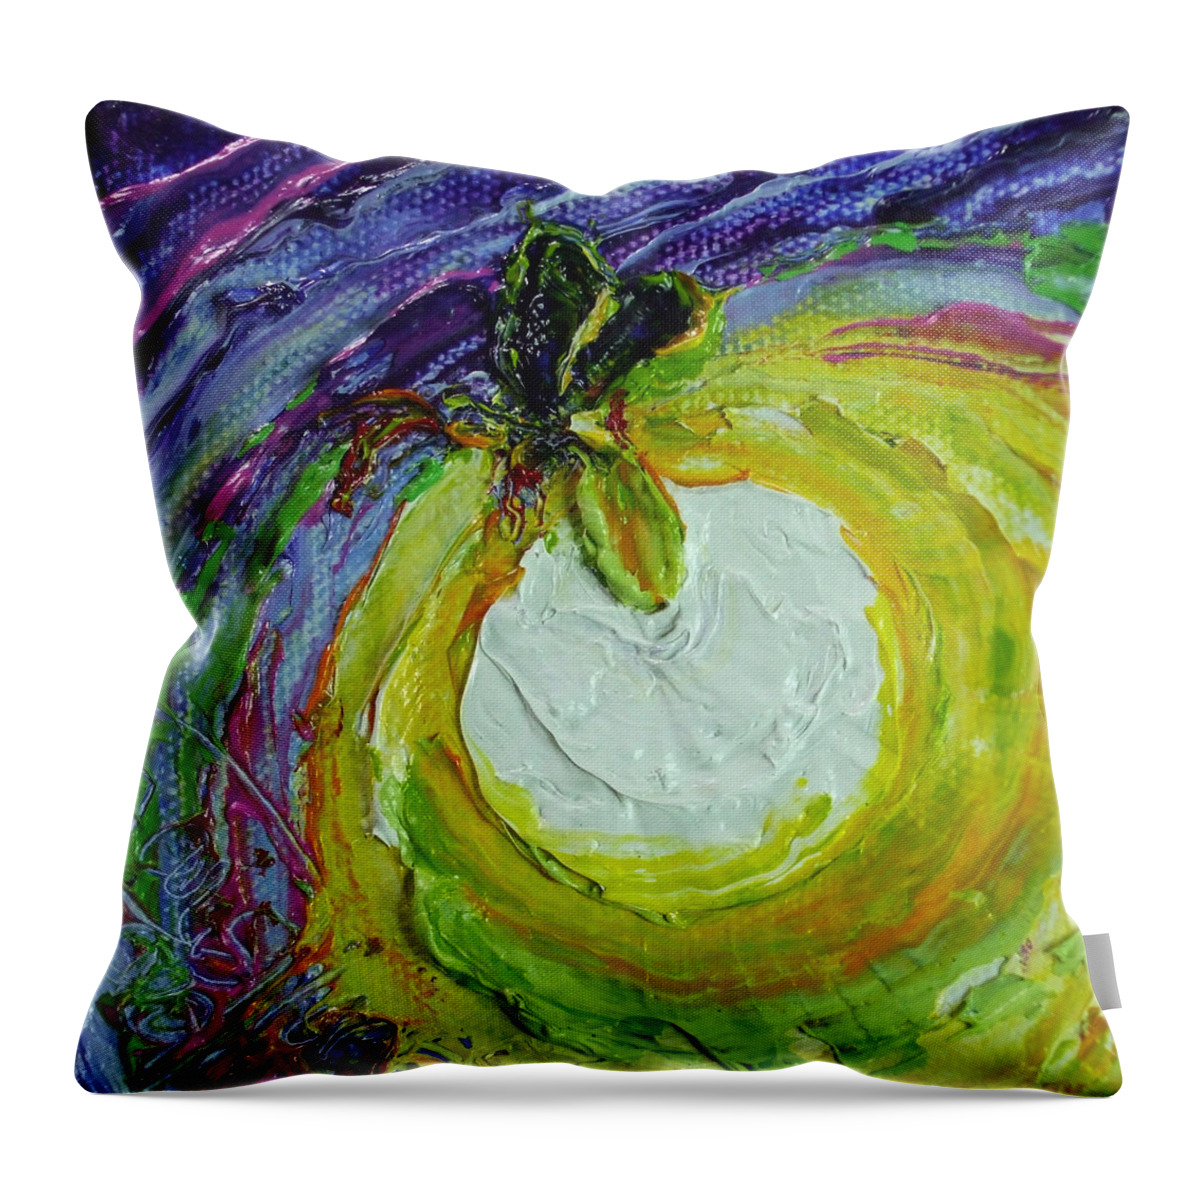 Oil On Canvas Throw Pillow featuring the painting Firefly At Night #2 by Paris Wyatt Llanso